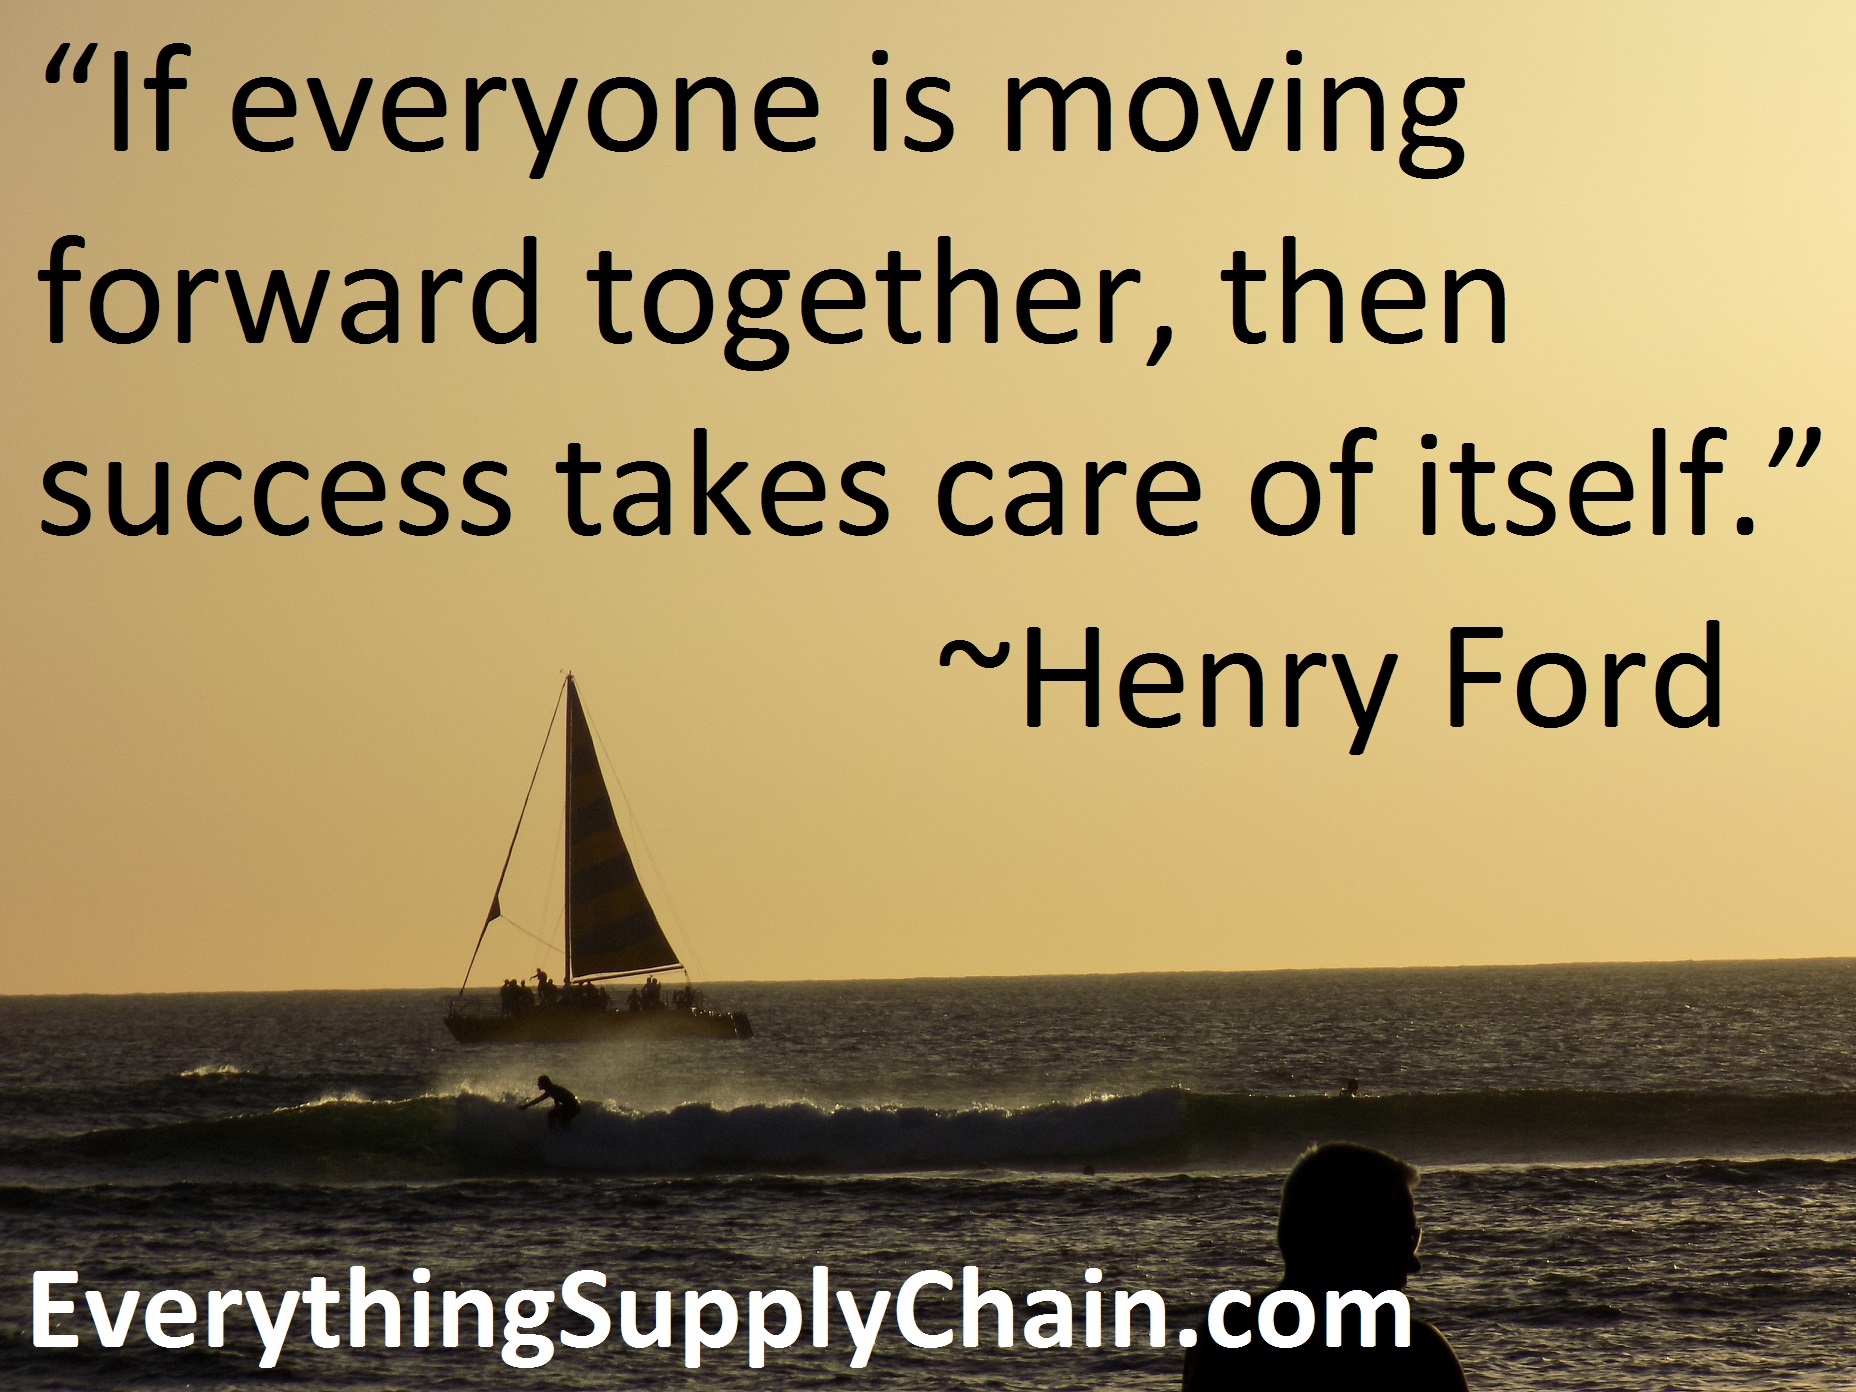 if everyone is moving forward together then success takes care of itself. henry ford